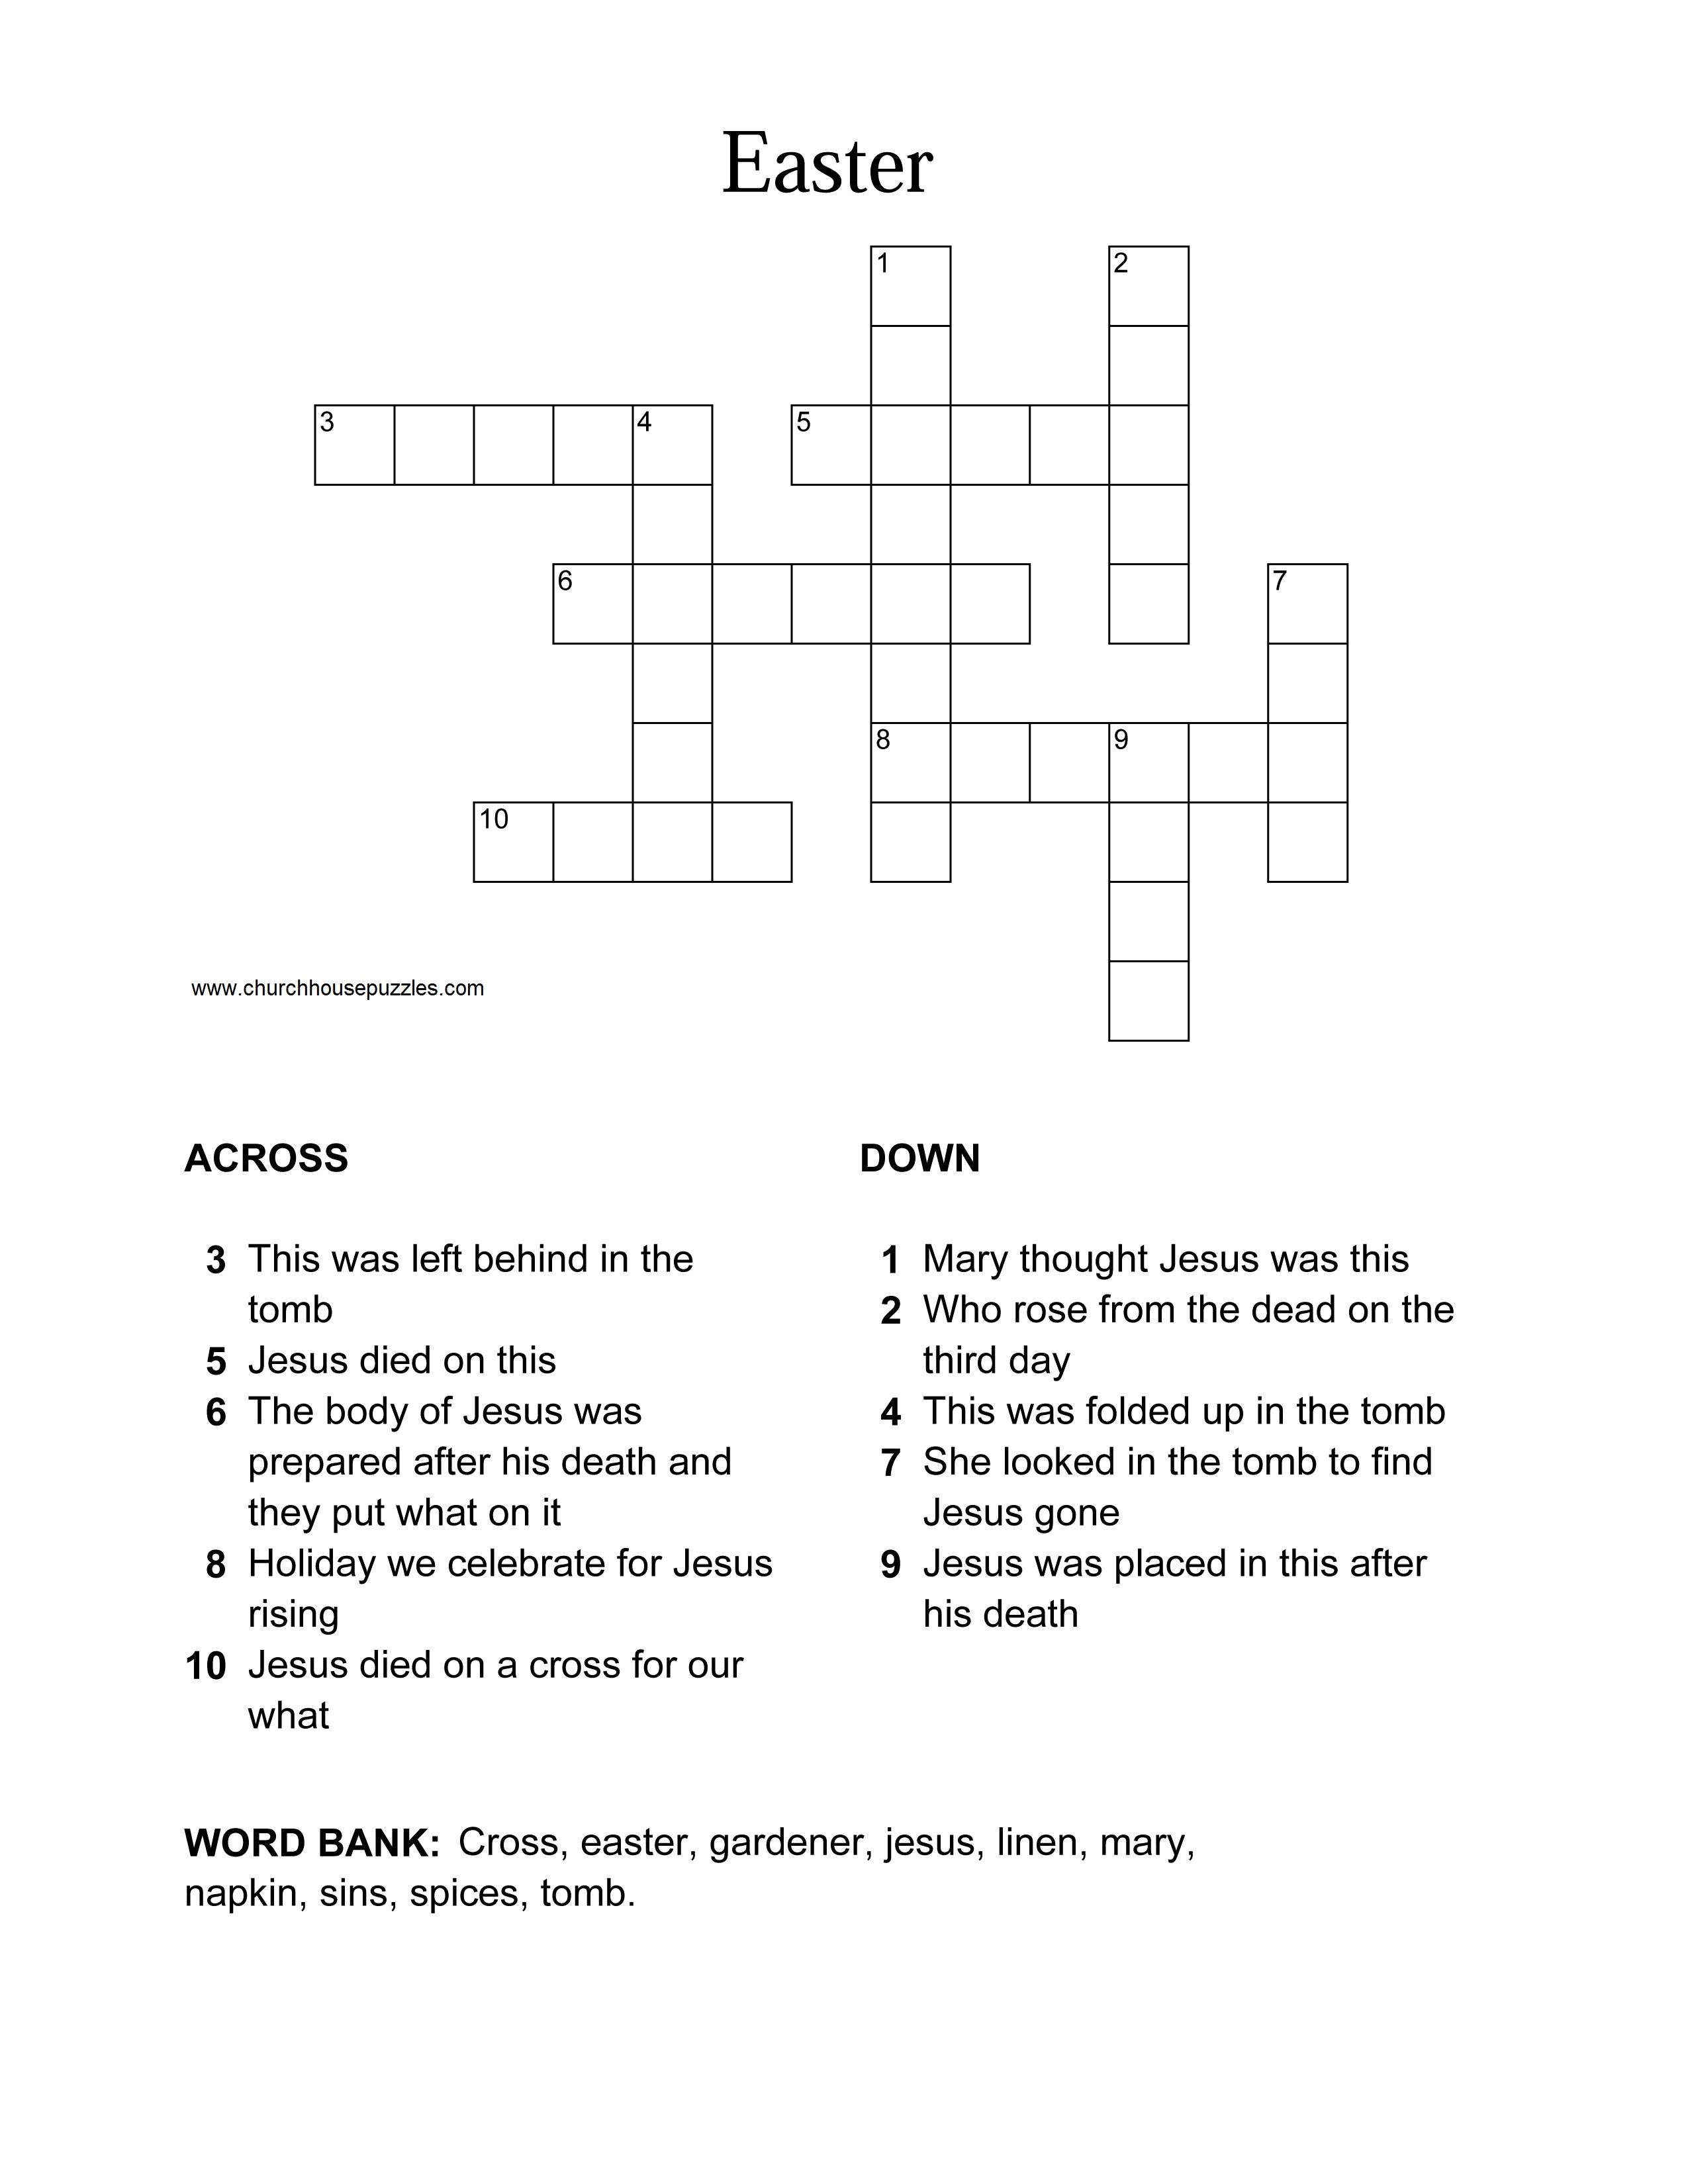 Easter Crossword Puzzle - Printable Crossword Puzzles Easter